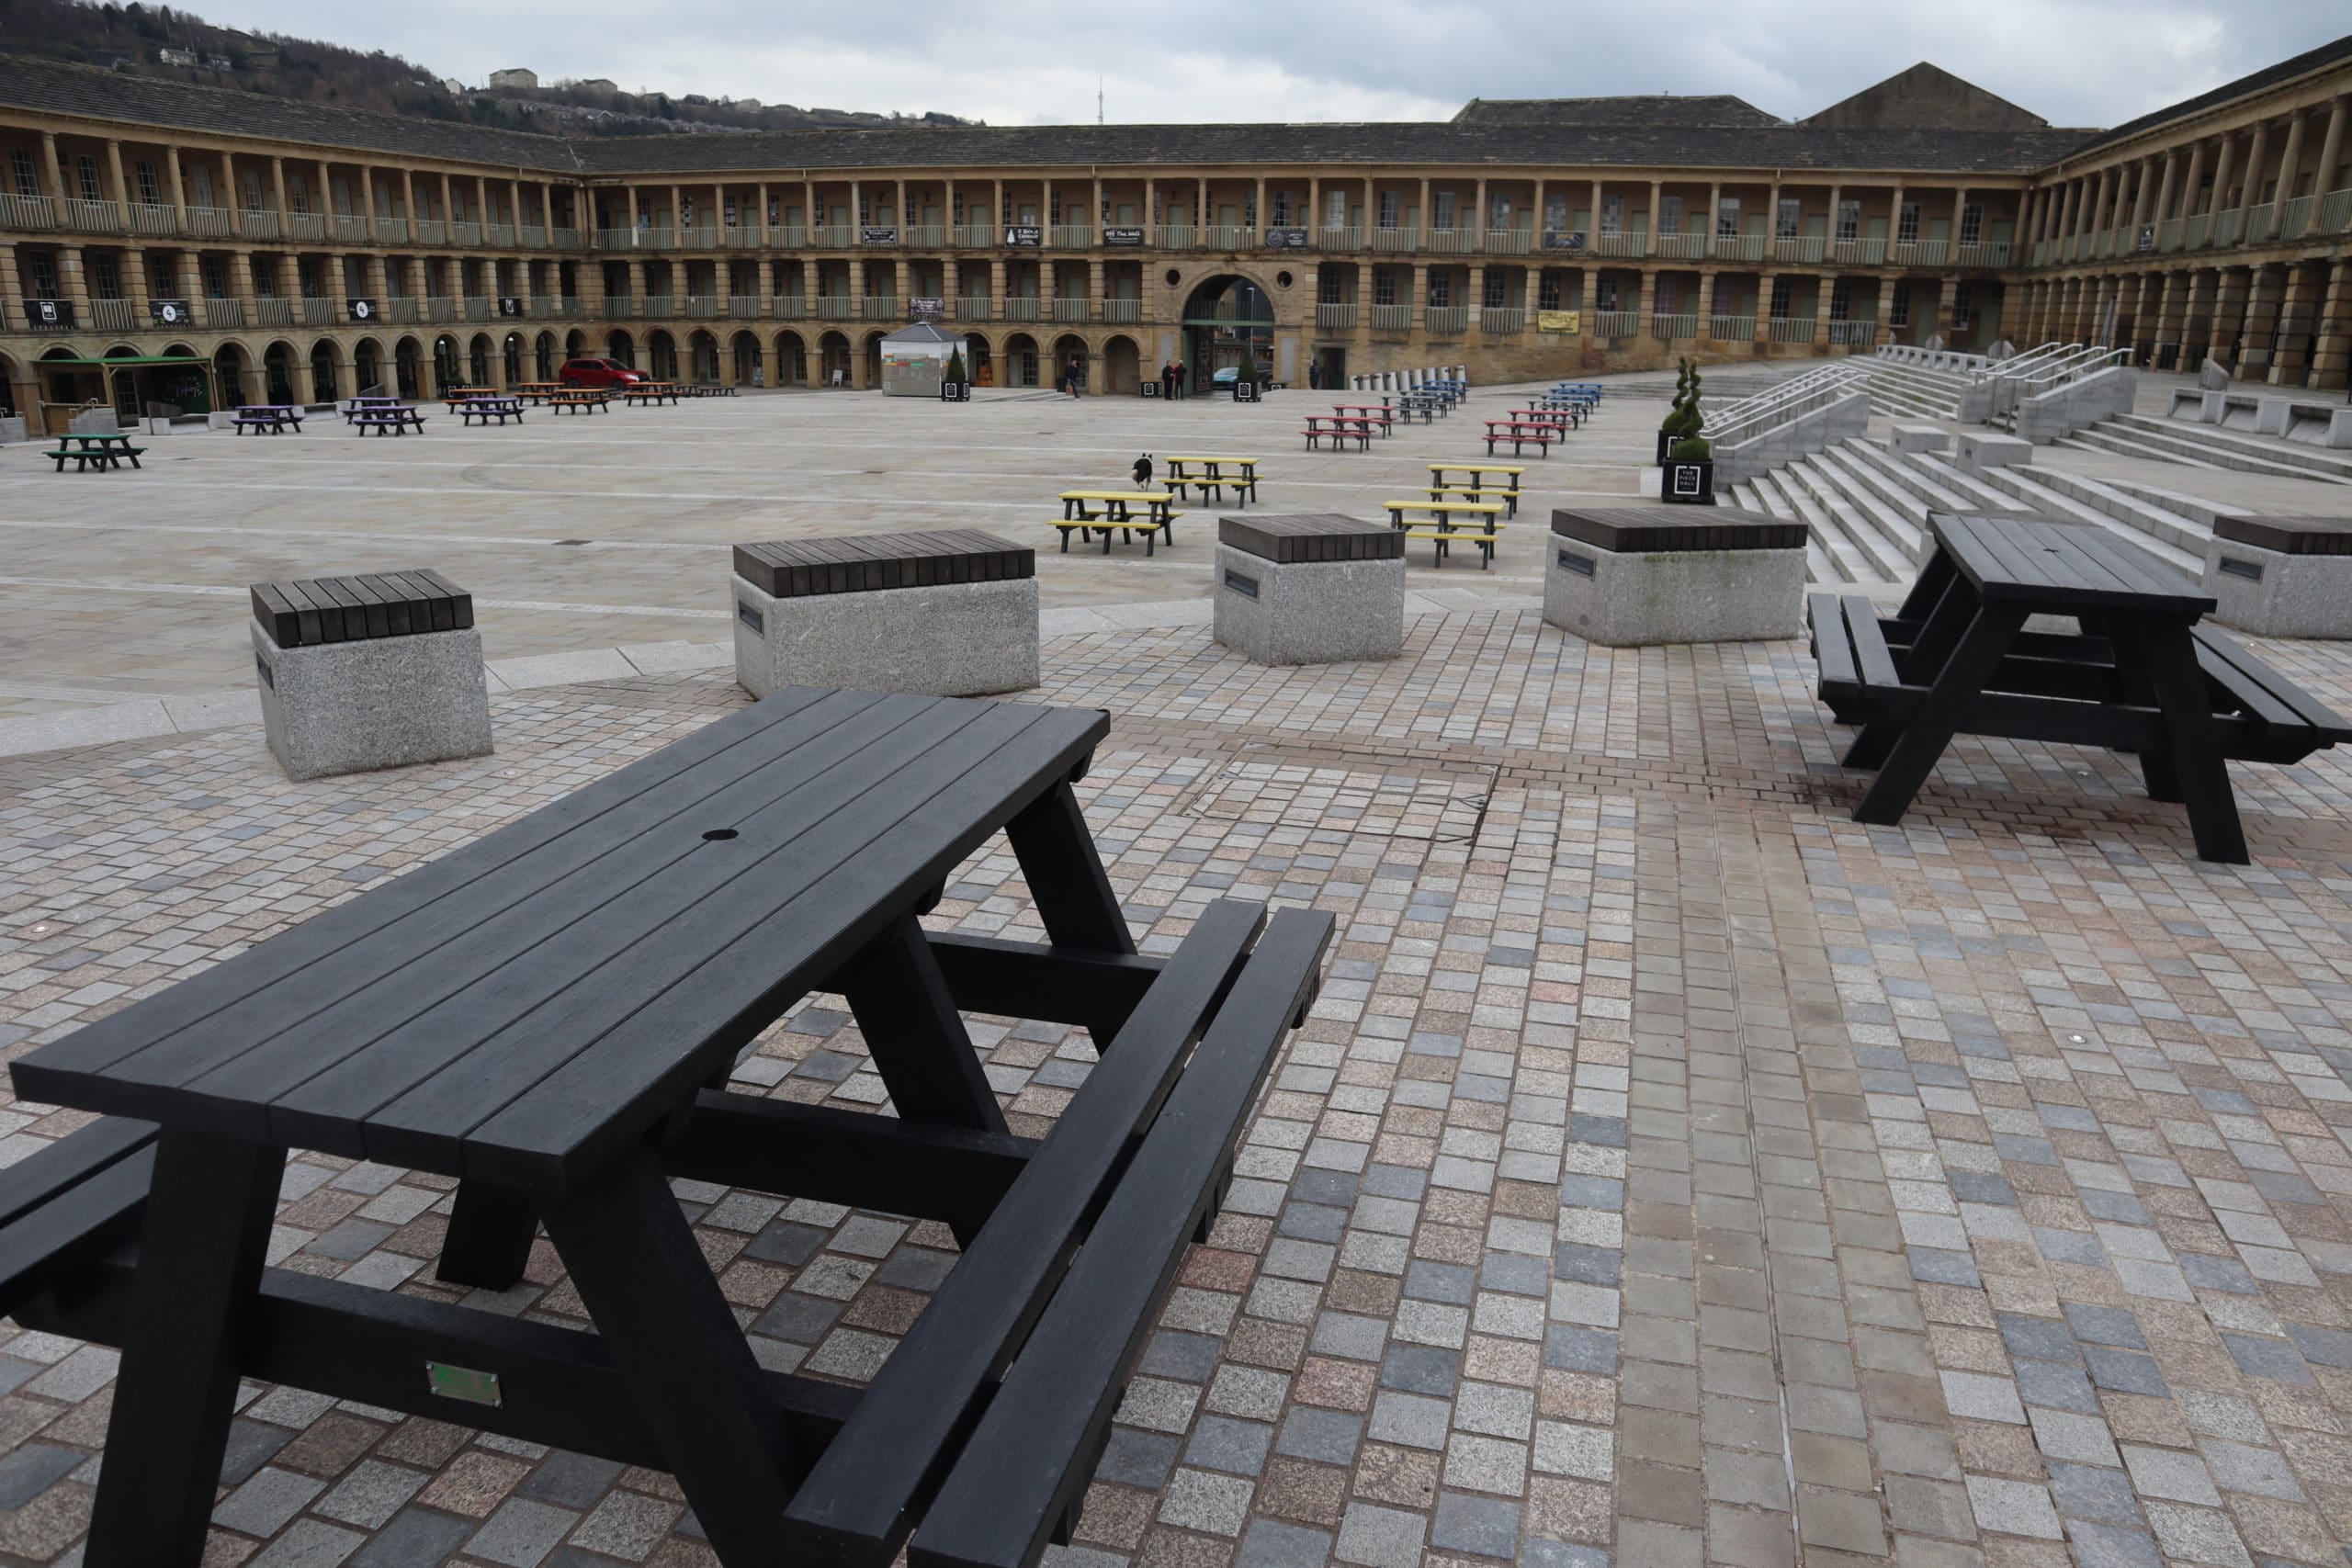 Denholme picnic tables at The Piece Hall